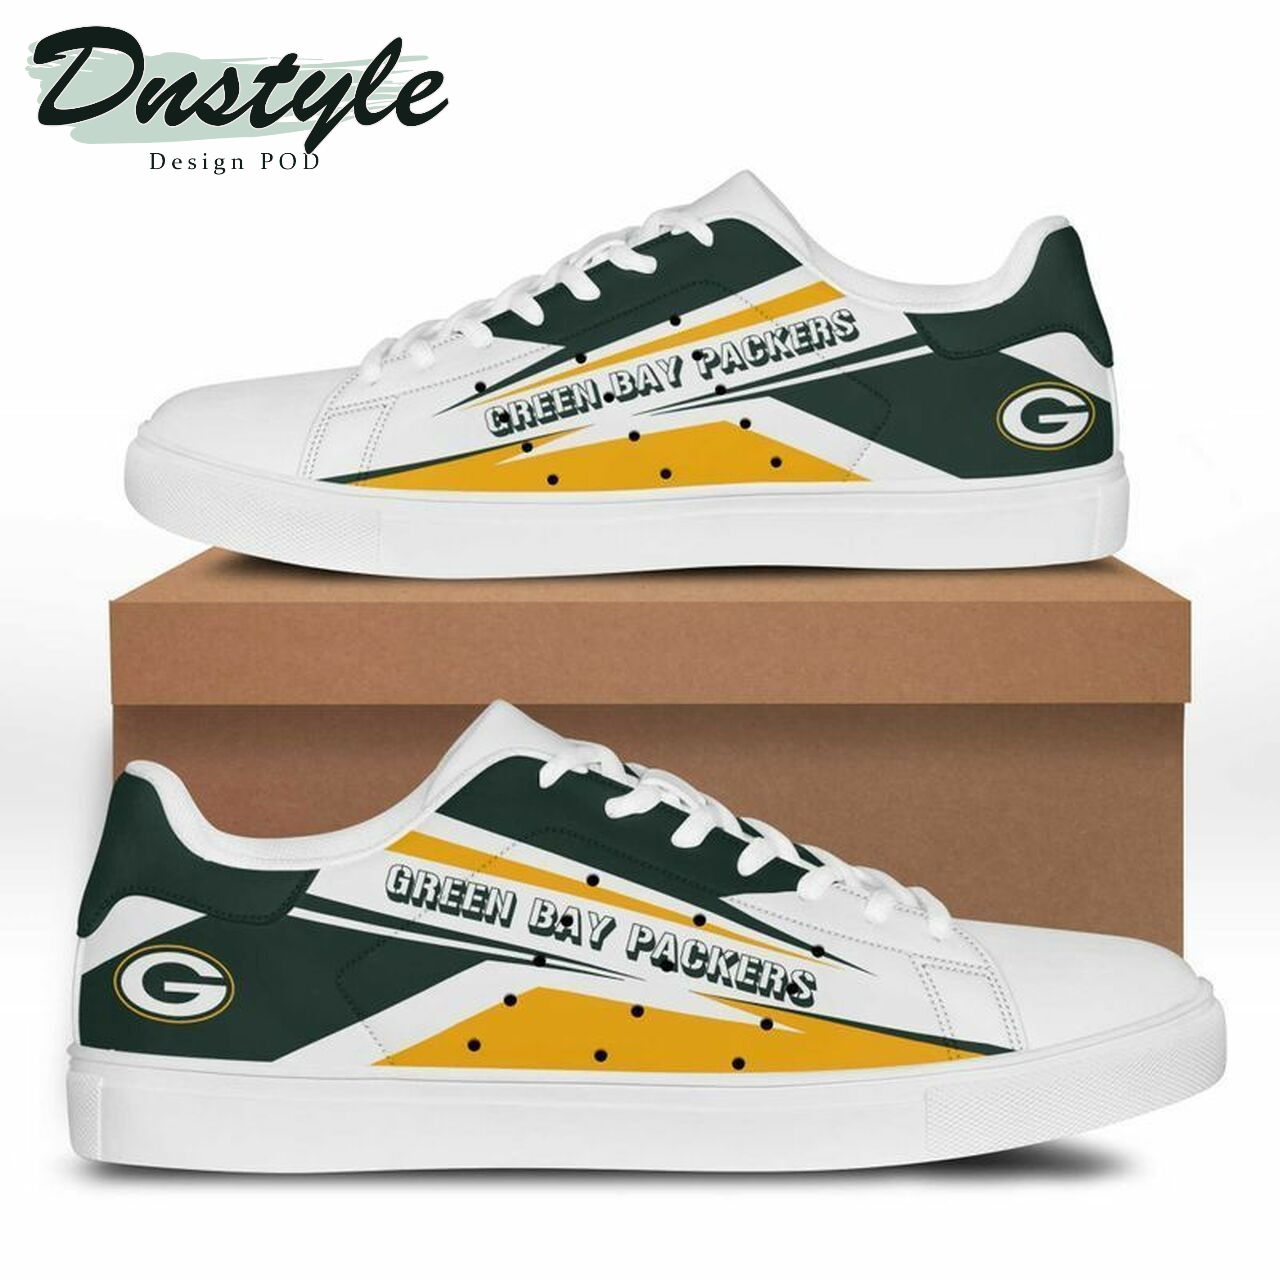 Green bay packers NFL stan smith low top skate shoes